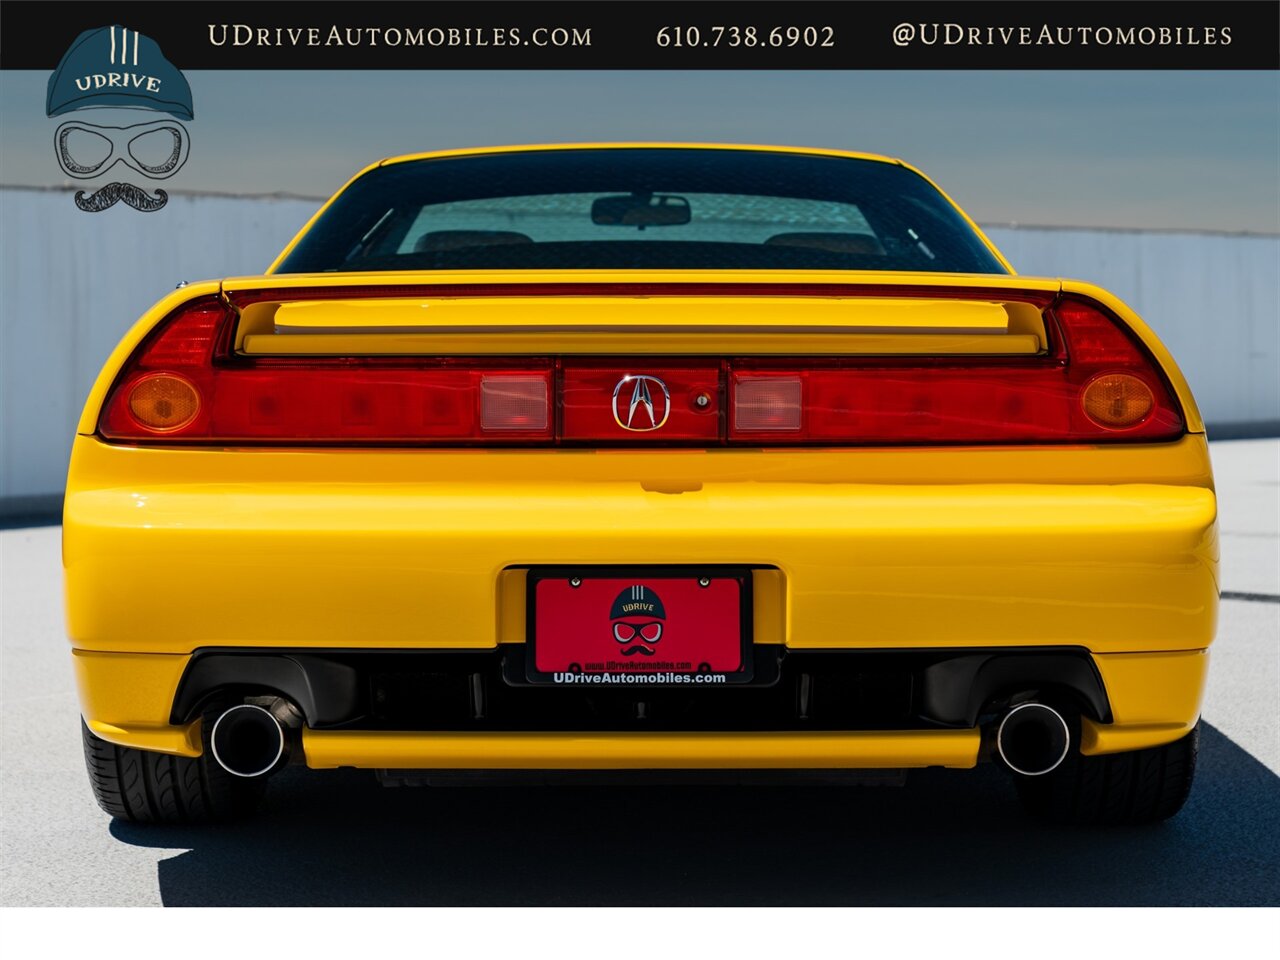 2003 Acura NSX NSX-T  Spa Yellow over Yellow Lthr 1 of 13 Produced - Photo 21 - West Chester, PA 19382